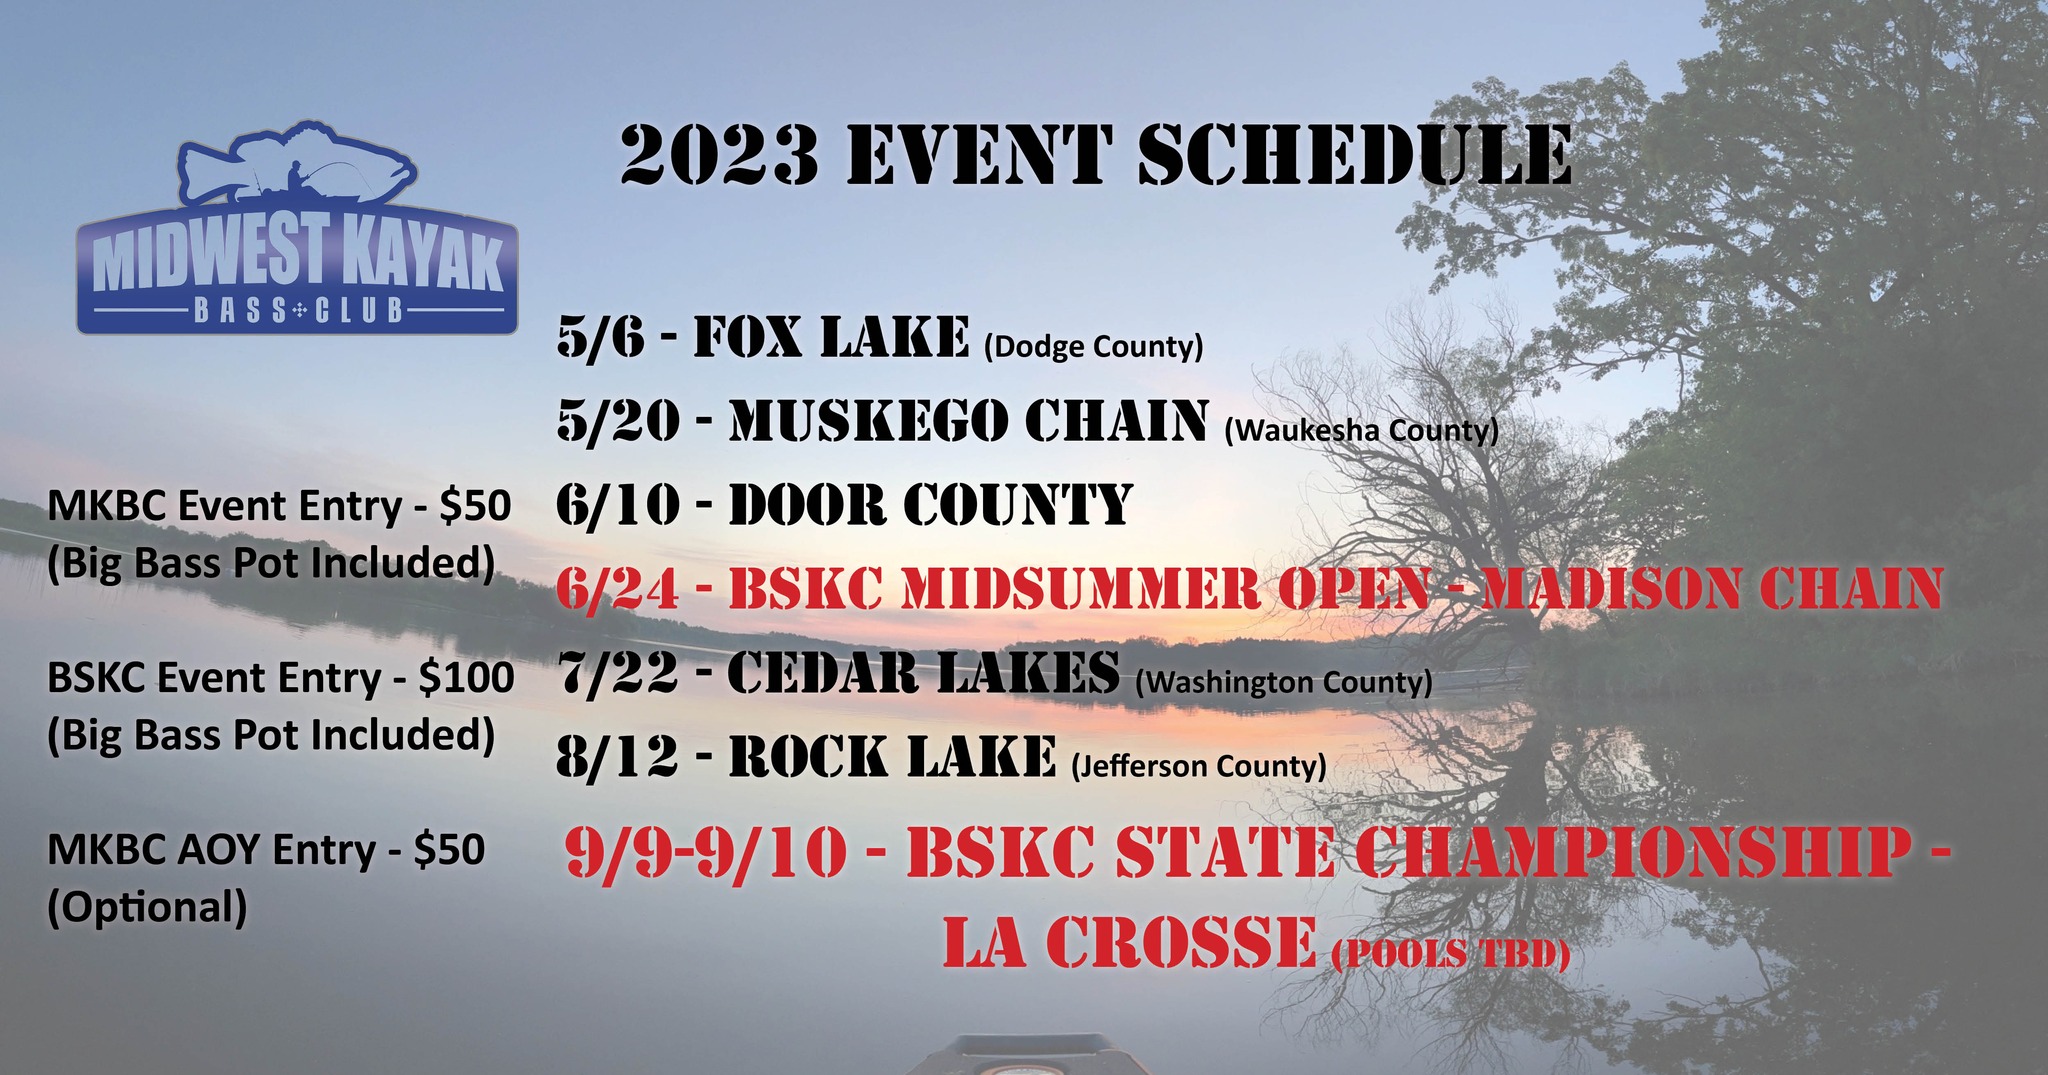 The 2023 schedule for MKBC